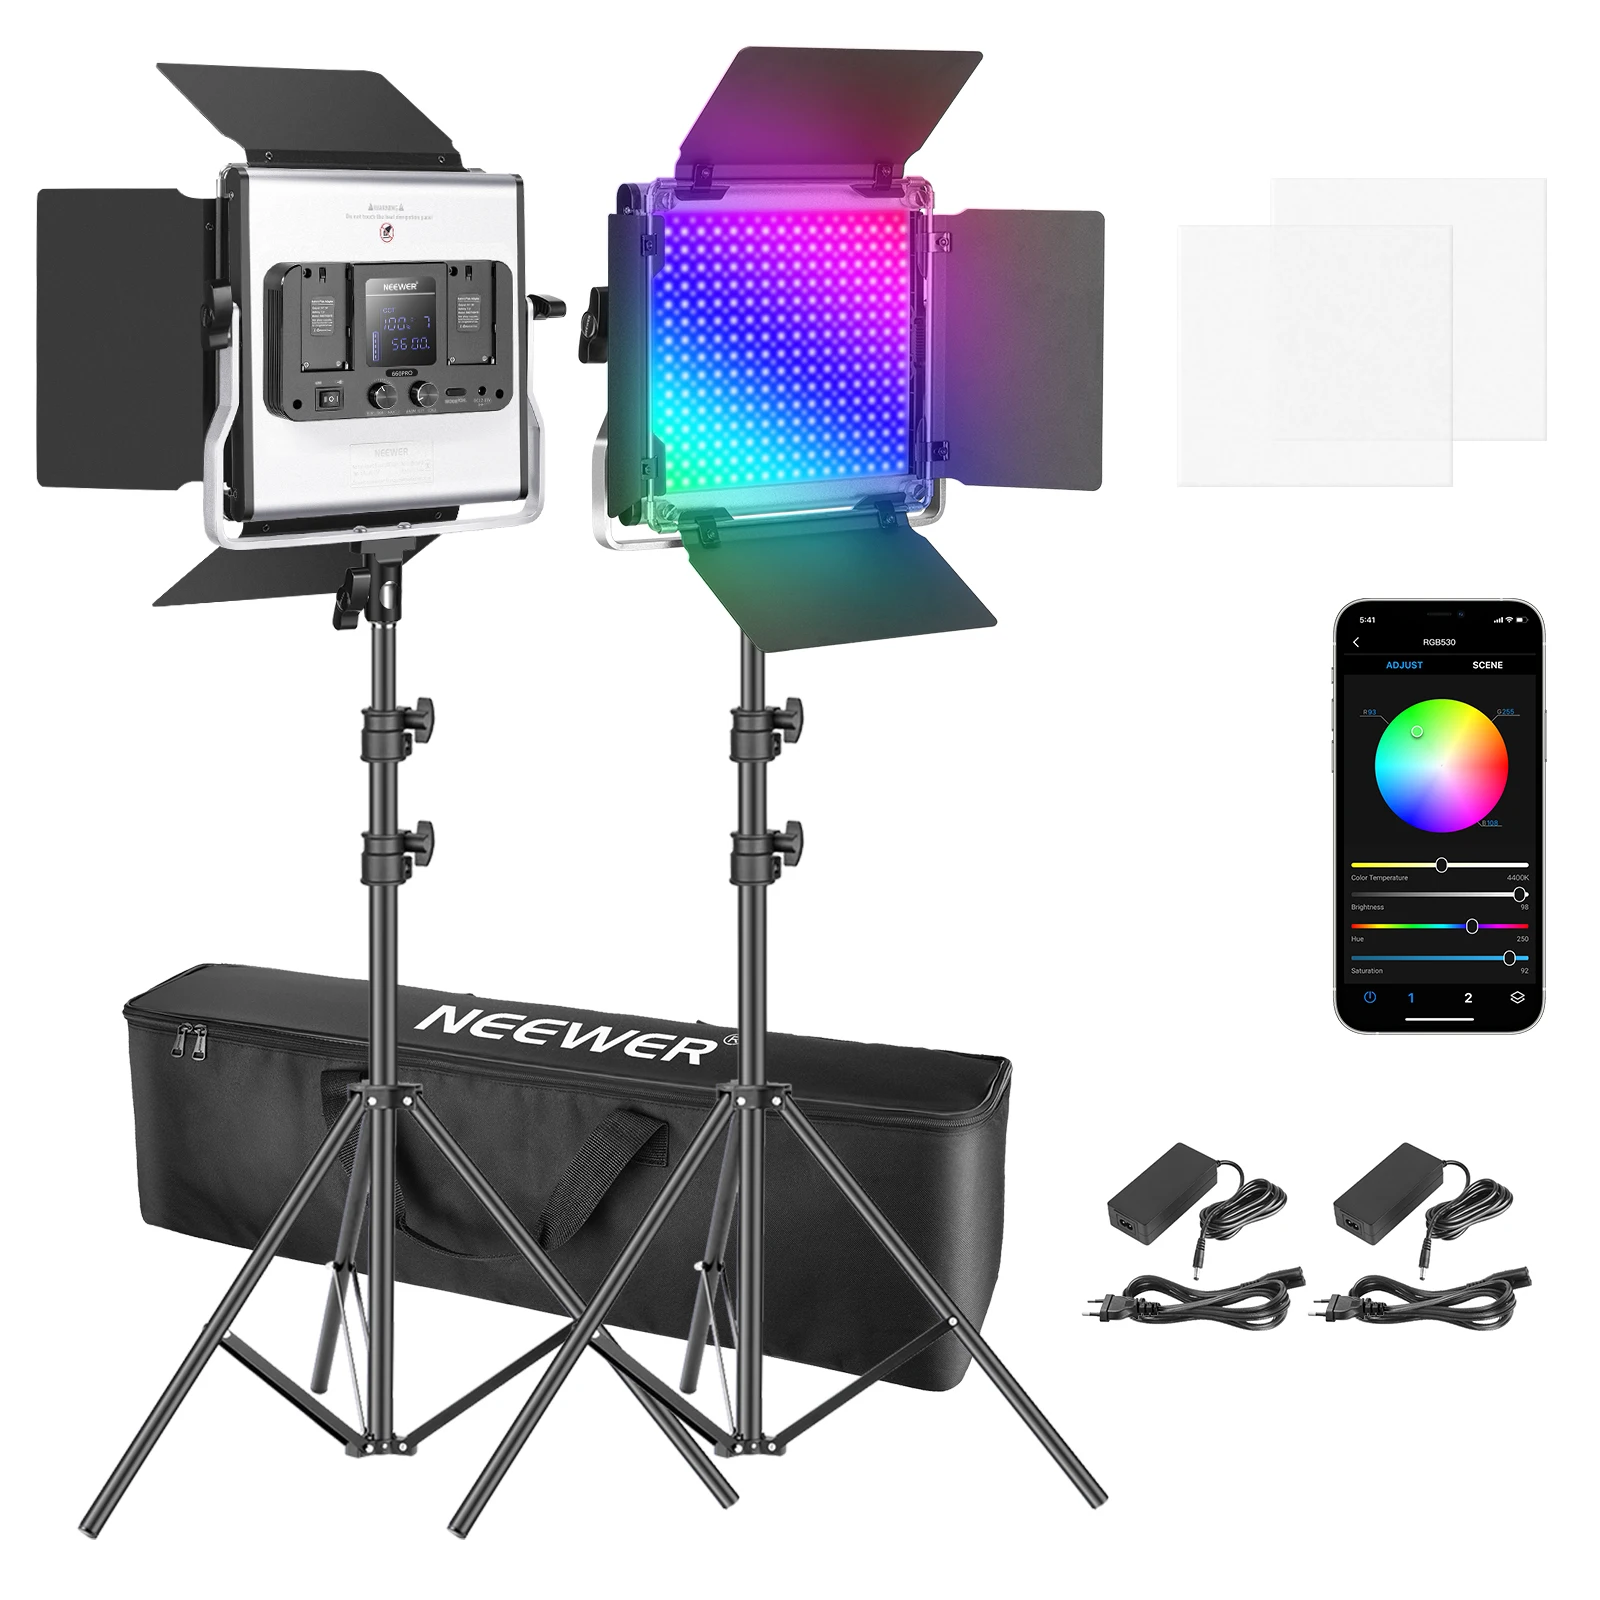 

Neewer 2/3 Packs 530 RGB Led Light With APP Control, Photography Video Lighting Kit With Stands And Bag, 528 SMD LEDs CRI95